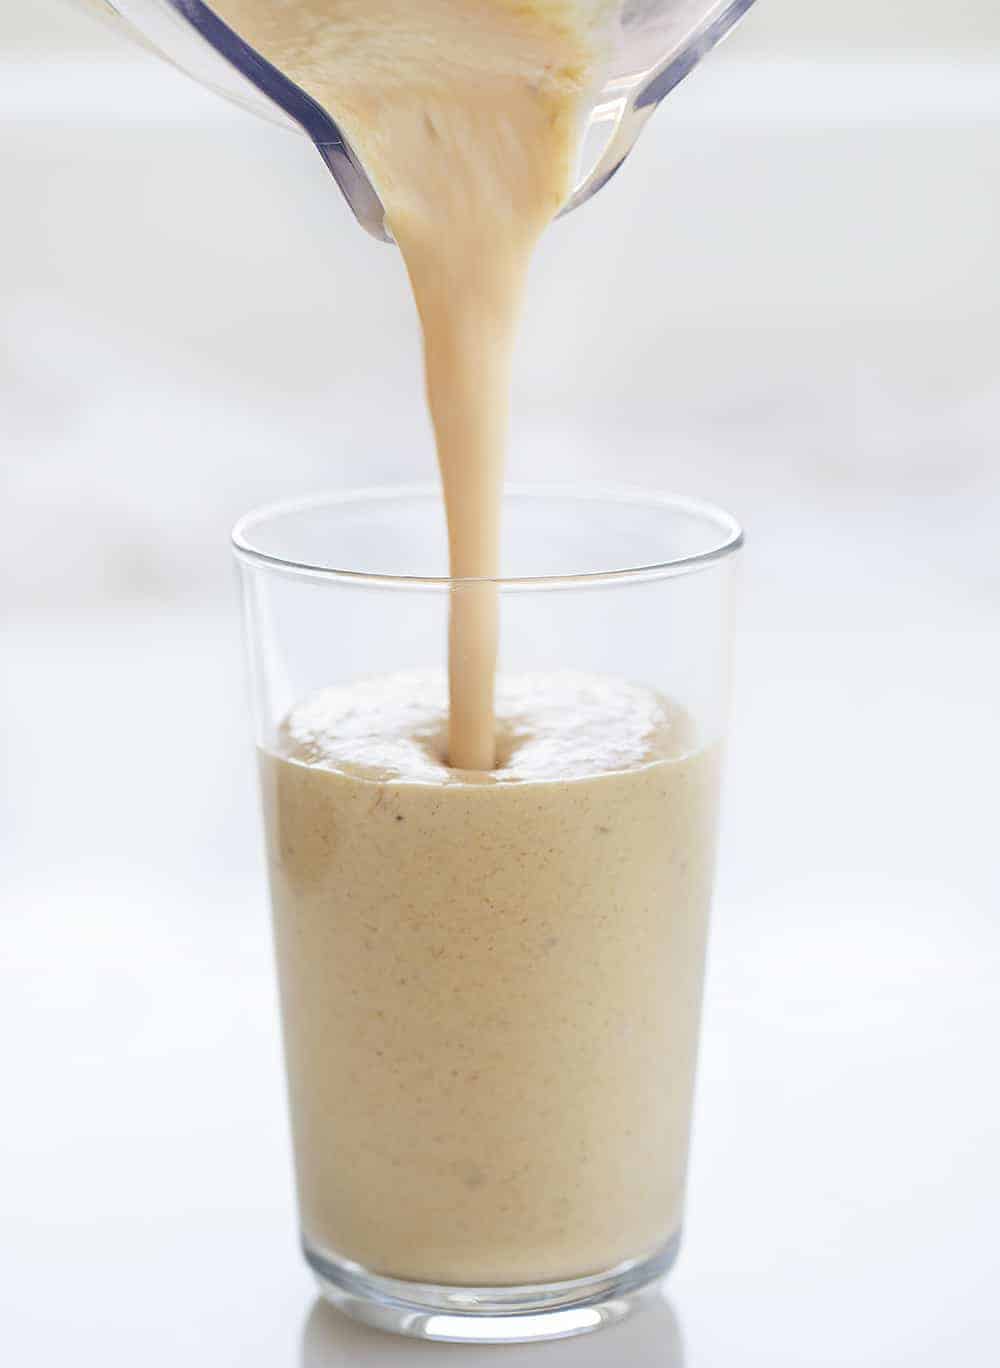 Pouring Peanut Butter Banana Smoothie into a Glass